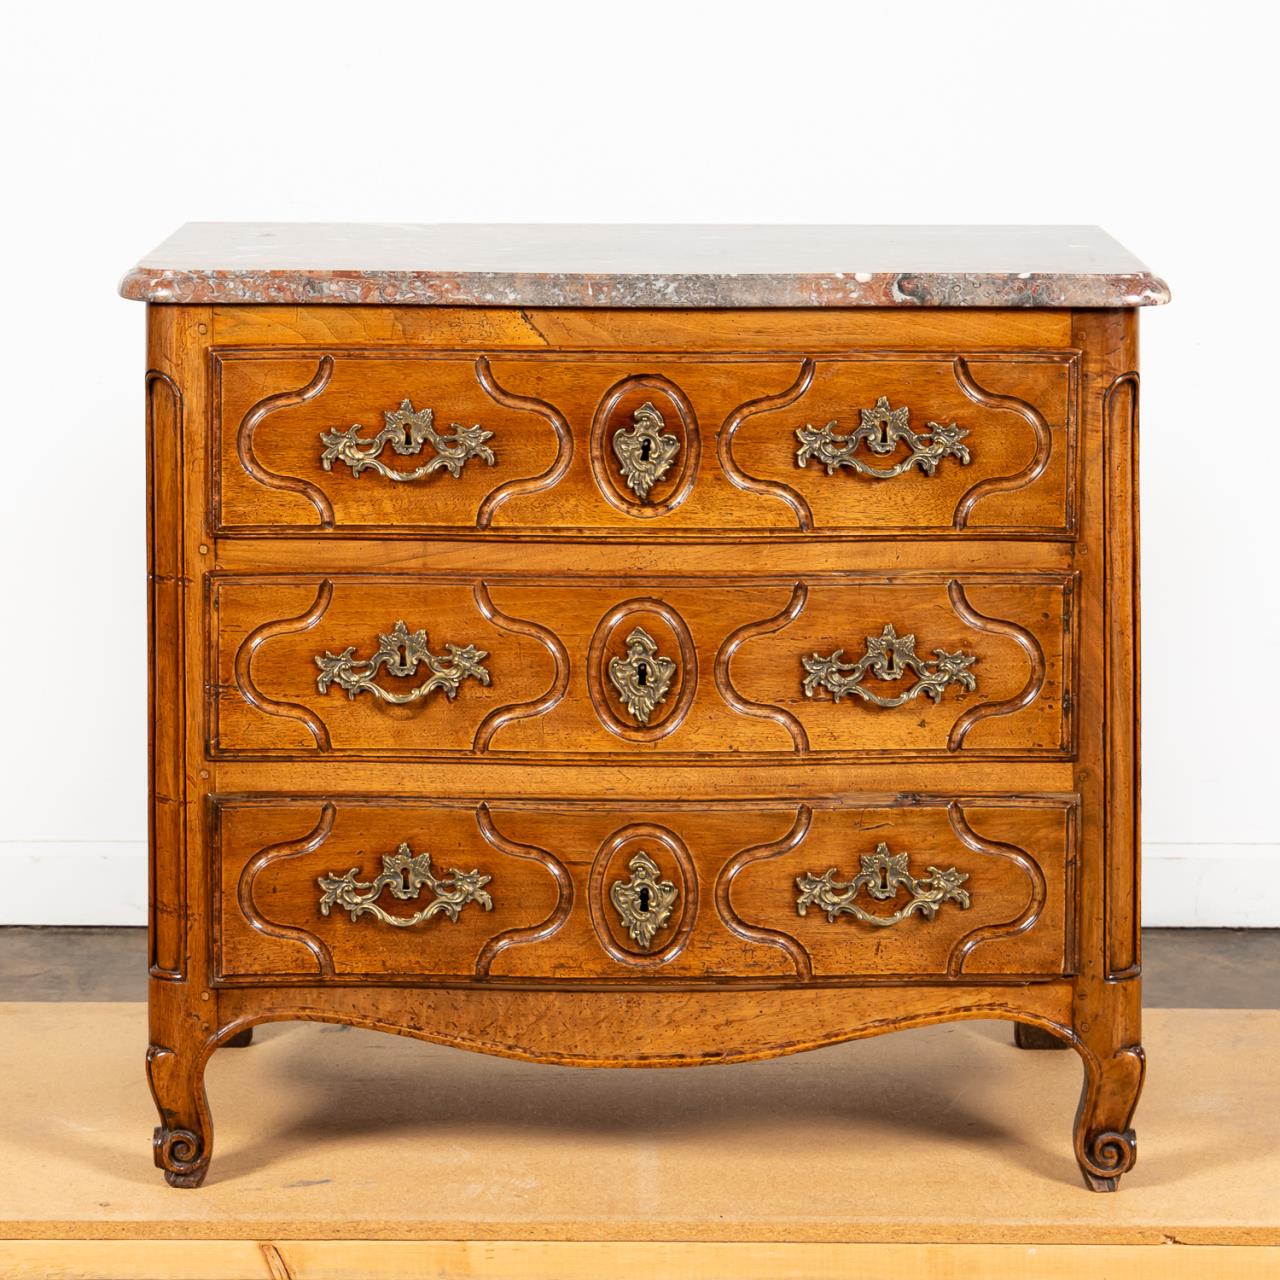 19TH C. LOUIS XV-STYLE MARBLE TOP